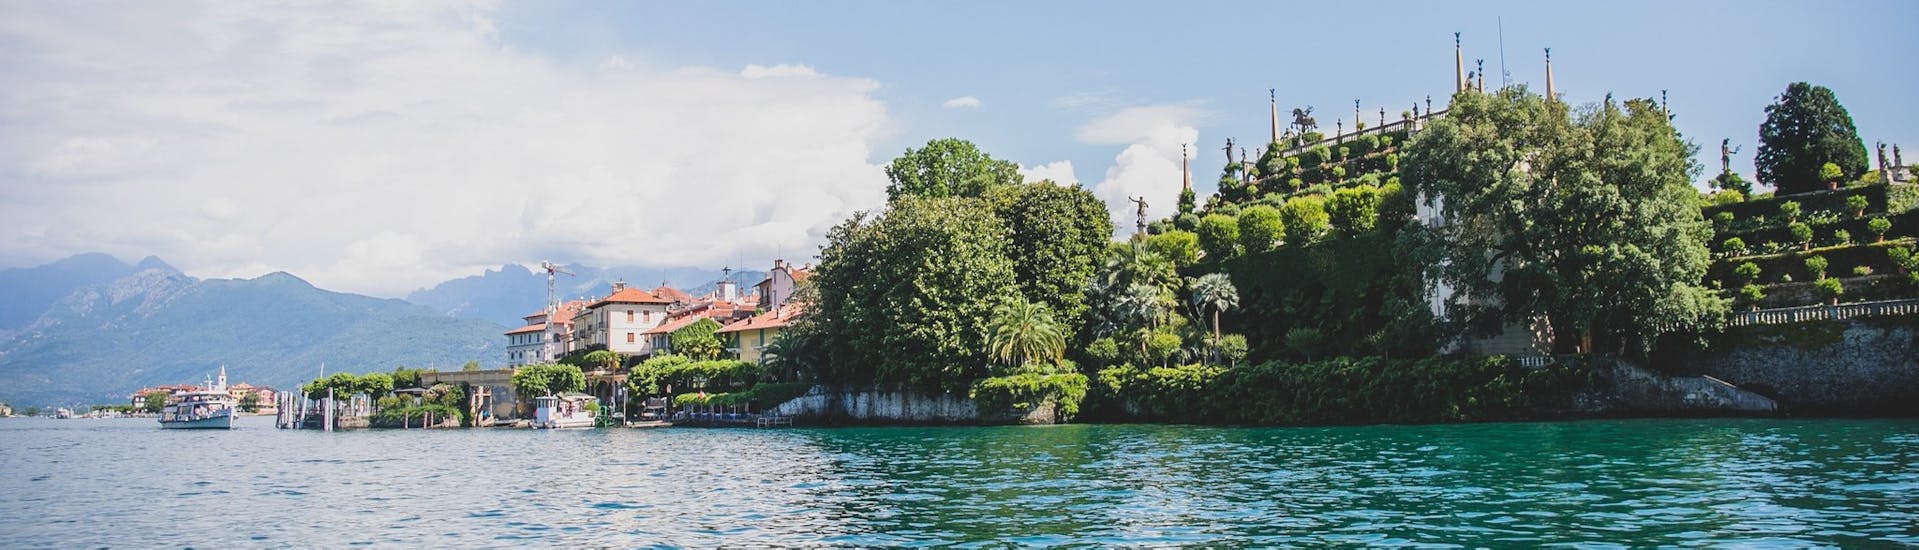 View of the Isola Bella during the Boat Transfer from Baveno to Isola Bella with Summer Boats Baveno.